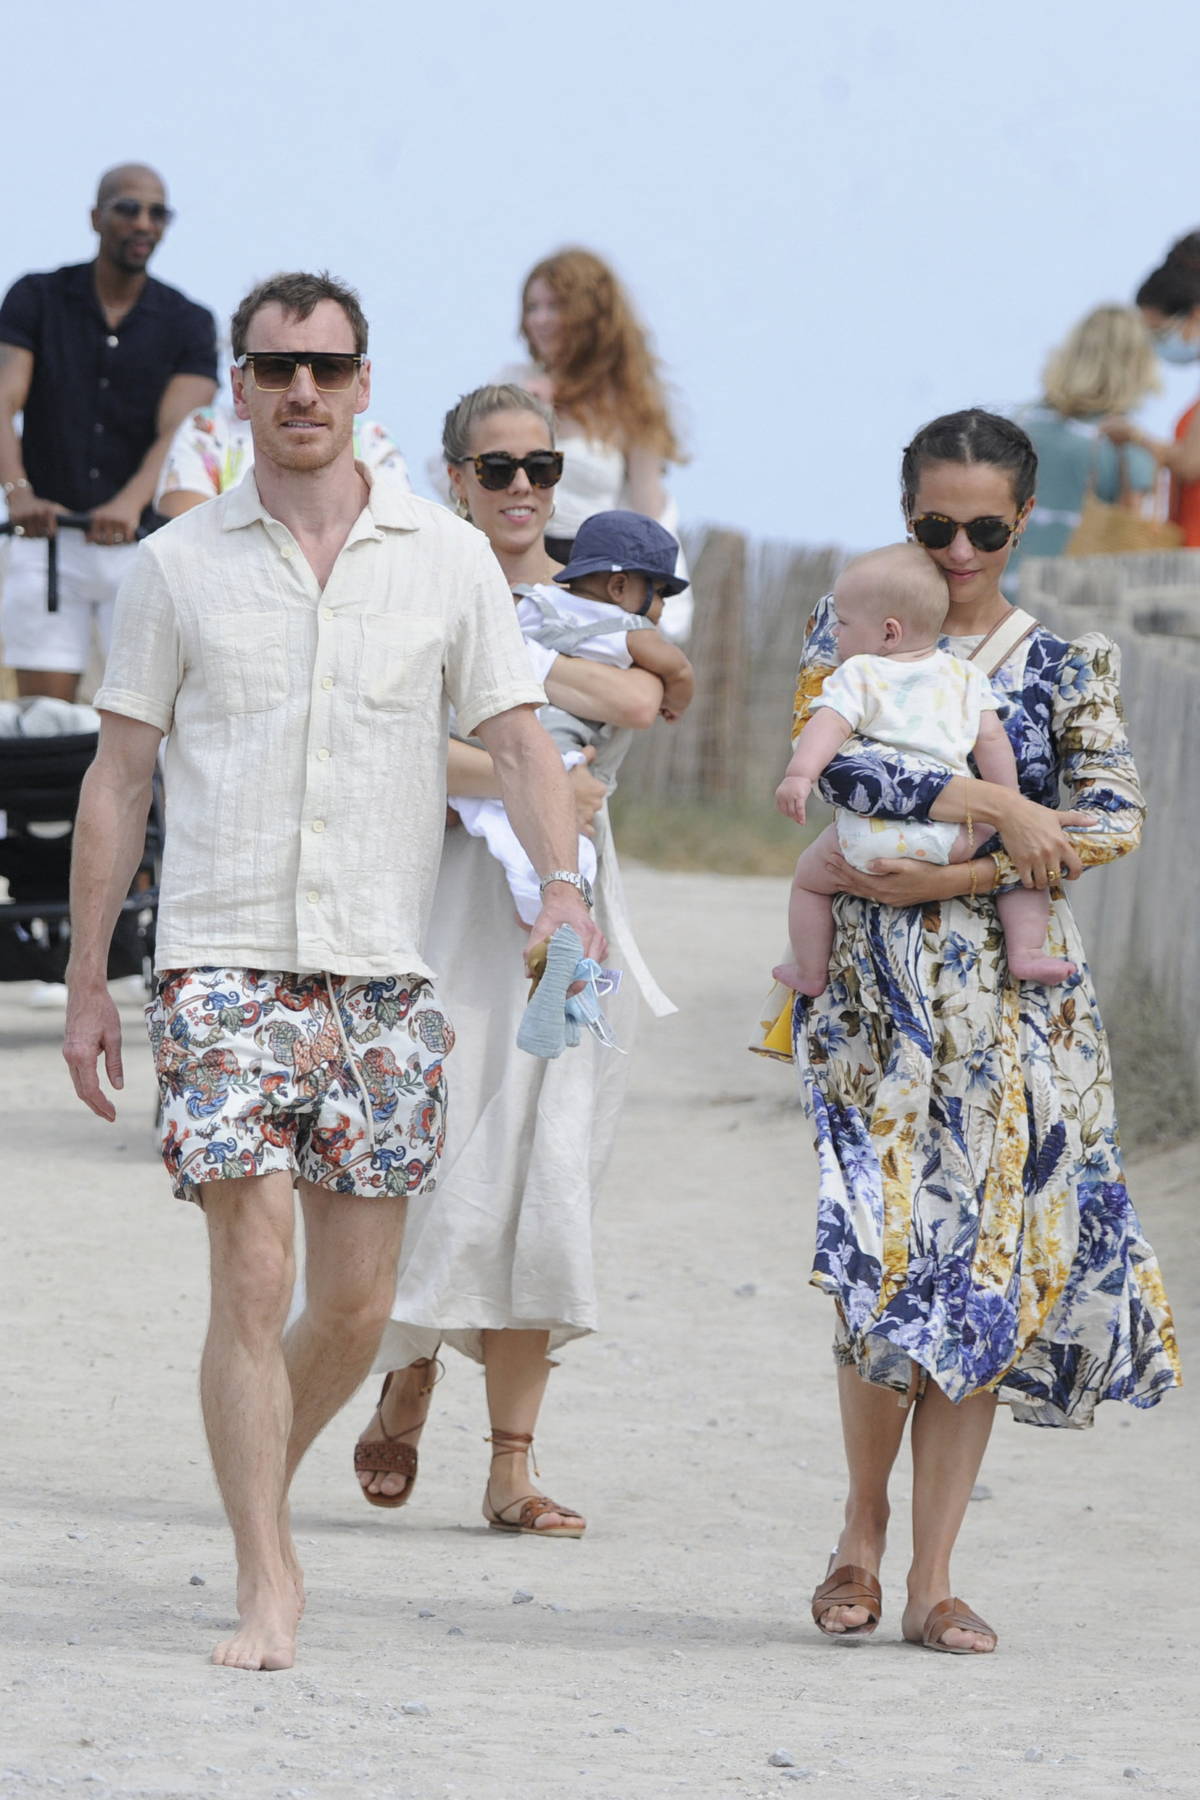 Alicia Vikander and husband Michael Fassbender seen with baby in buggy